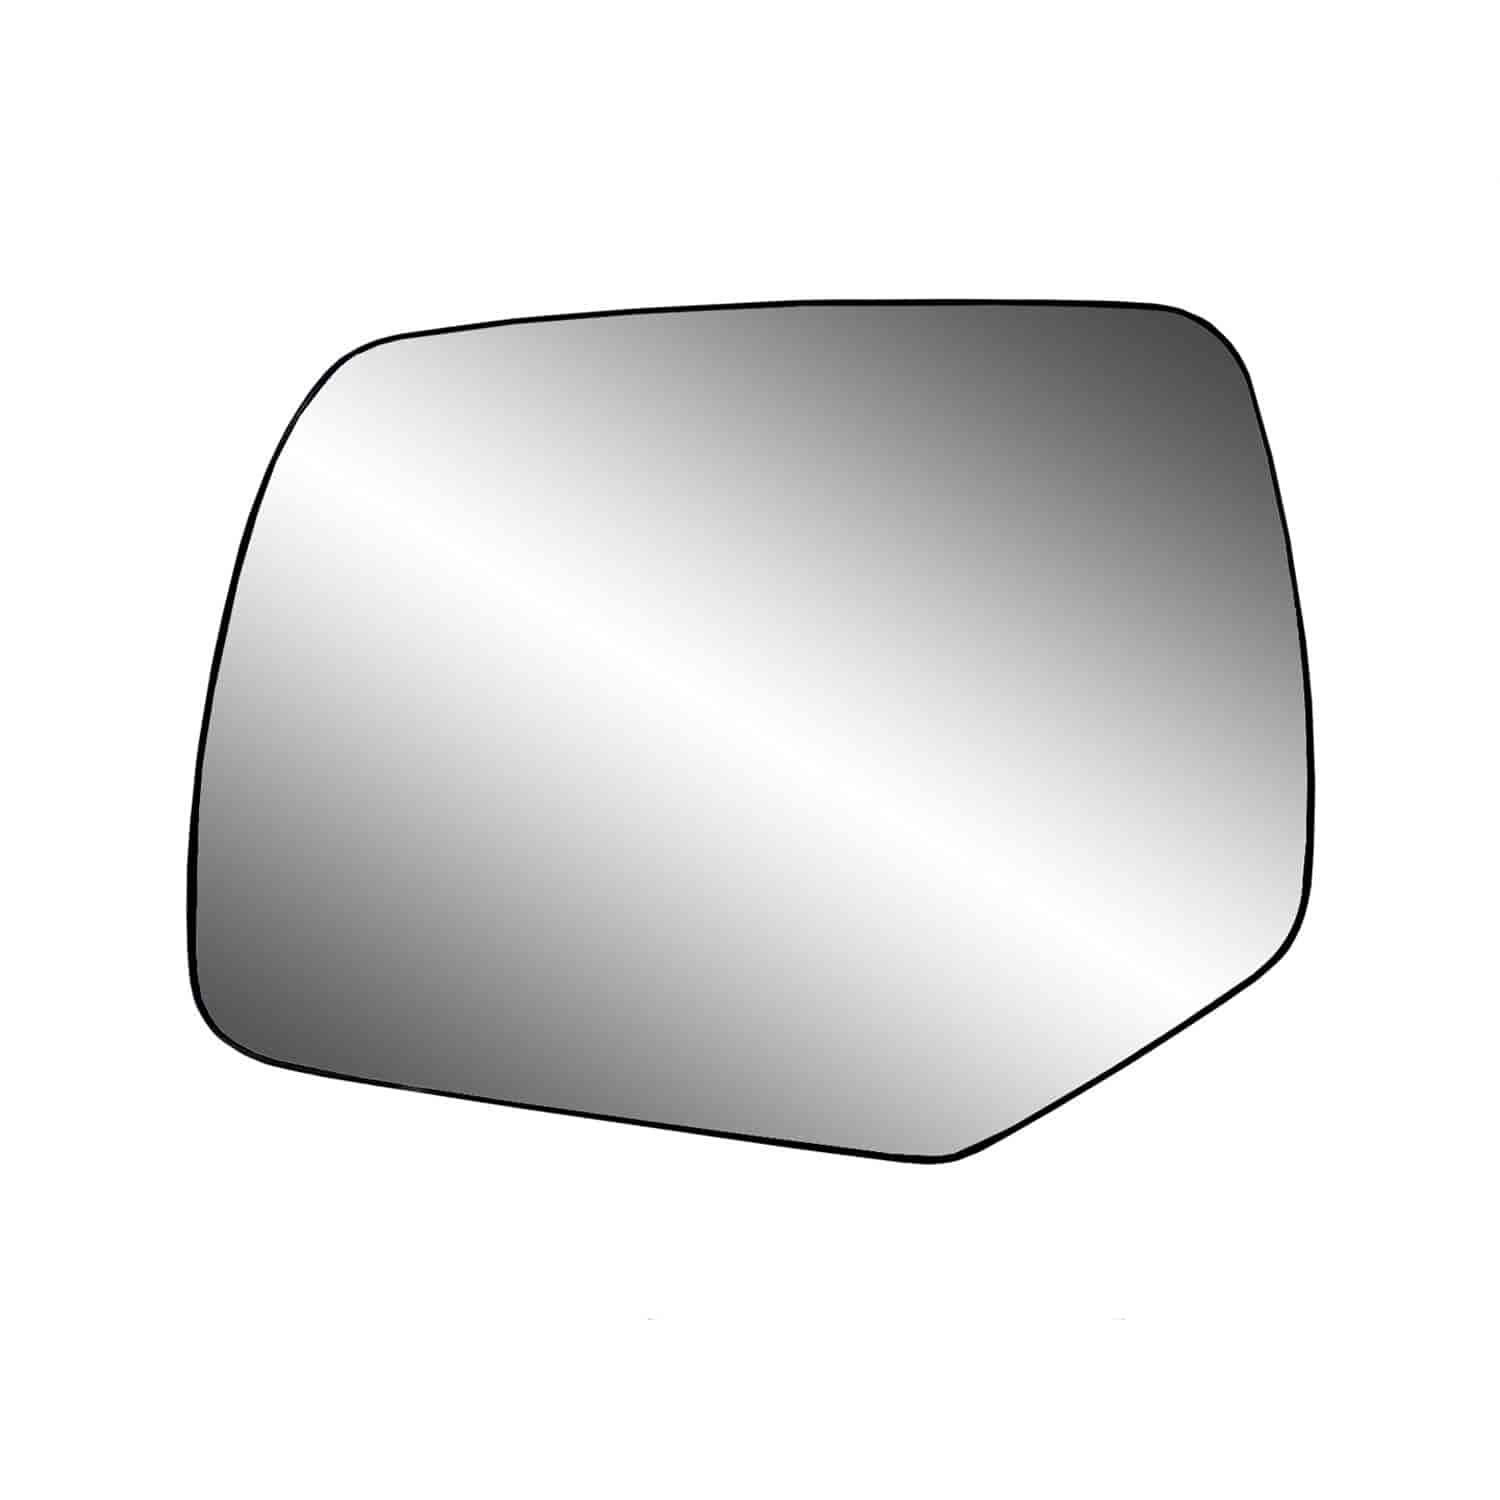 Replacement Glass Assembly for 08-12 Escape/ Hybrid w/o Blind Spot lens; 08-11 Mariner/ Hybrid w/o B